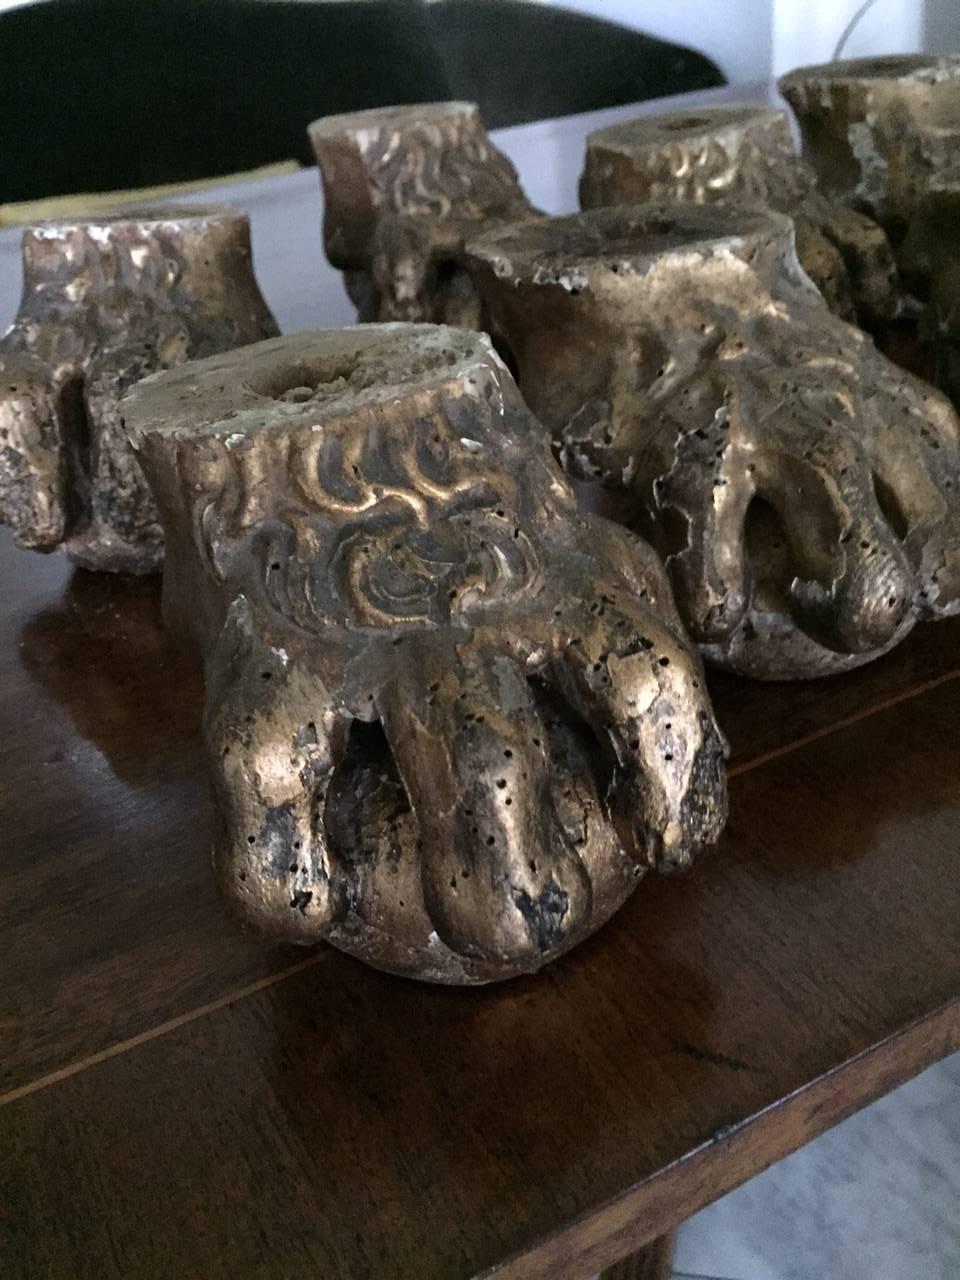 19th Century Gilded Ball and Claw Feet from English Furniture  Set of 4 In Good Condition For Sale In Savannah, GA